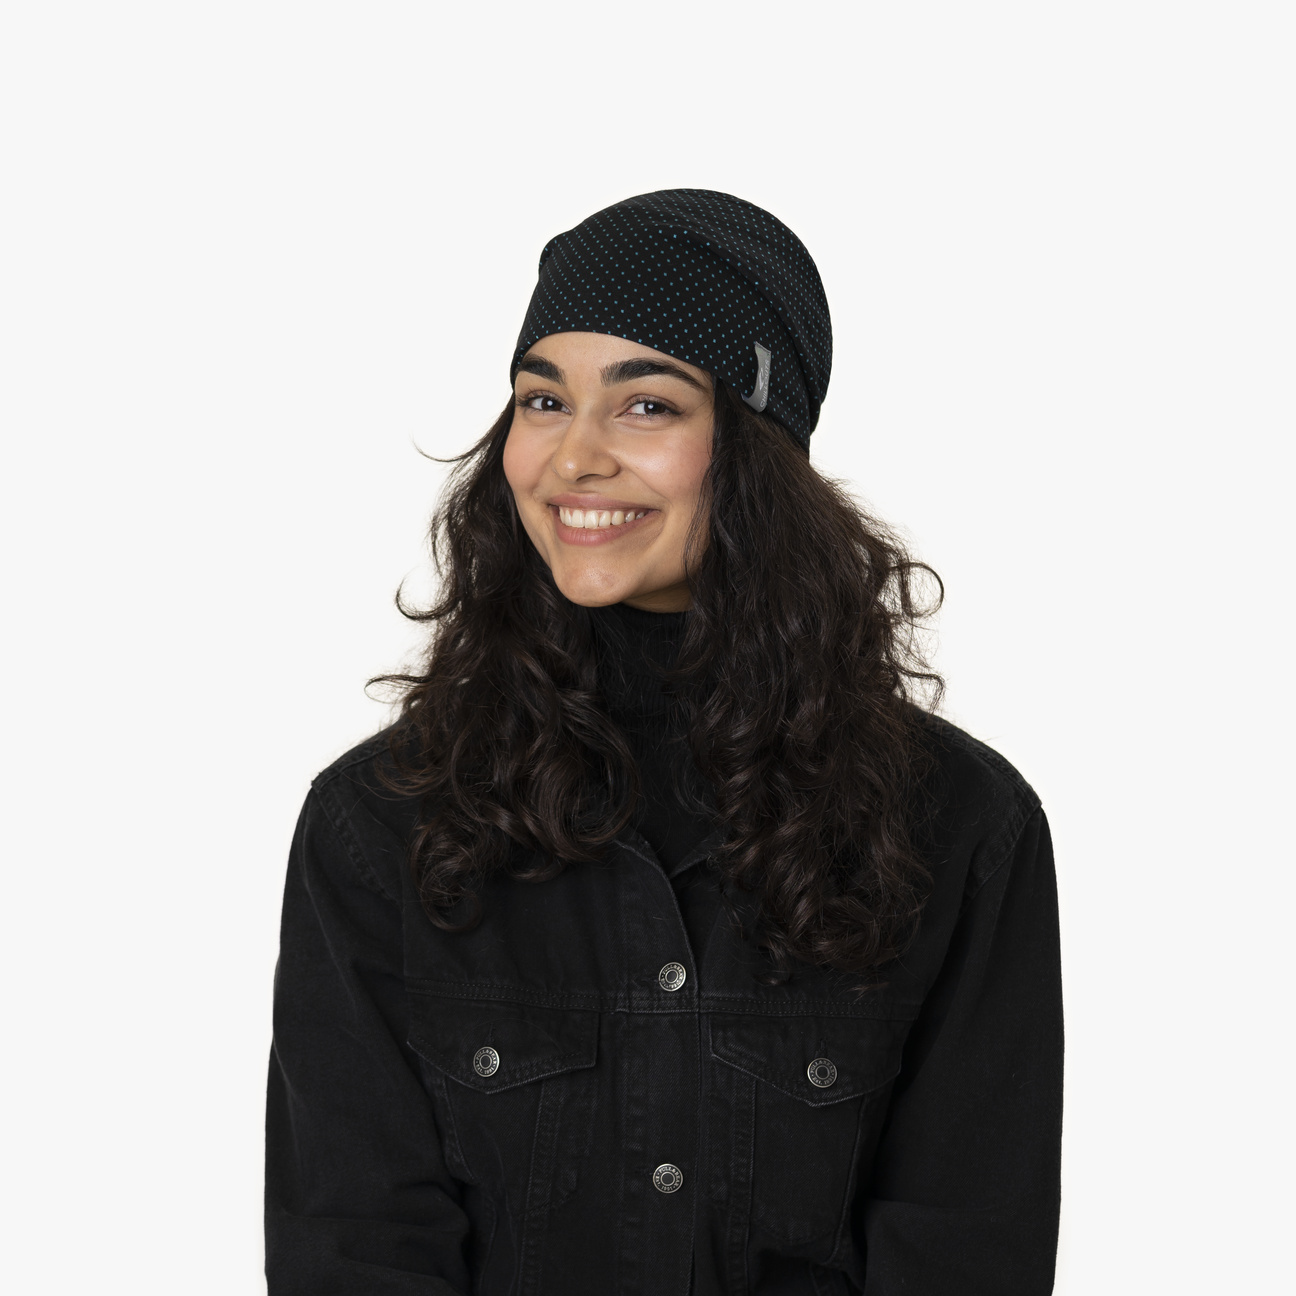 Florence Oversize Beanie by Chillouts - 24,95 €